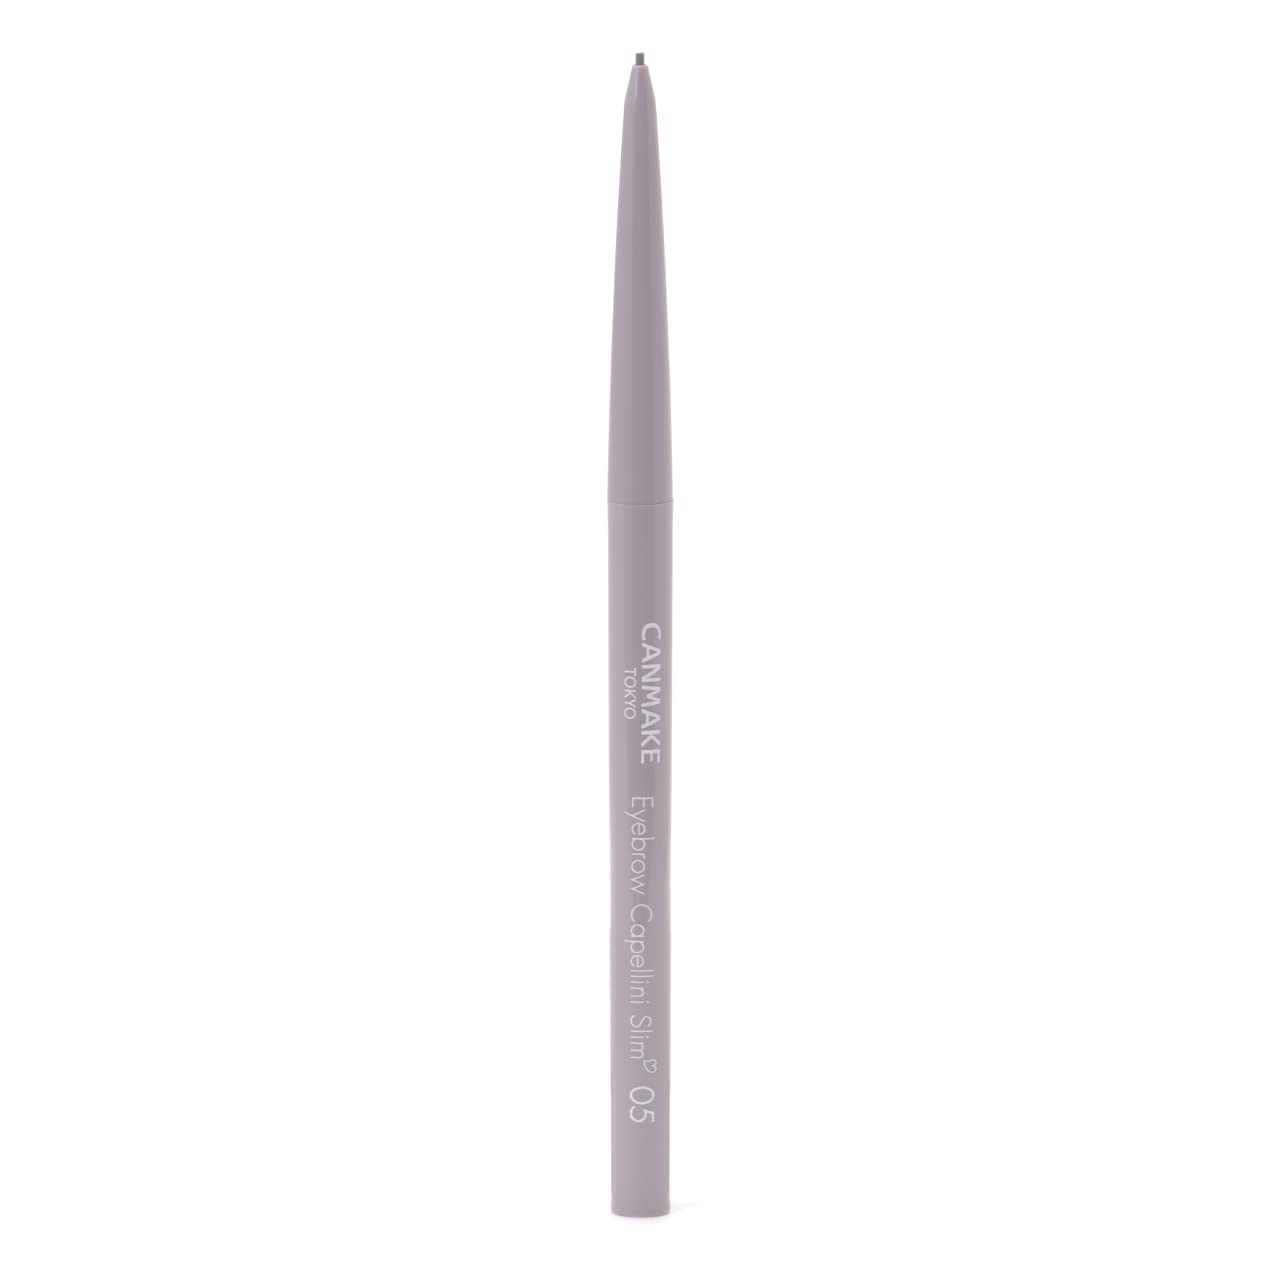 Canmake Eyebrow Cappellini Slim 05 Greige Brown Fine Core 0.97mm 0.03g